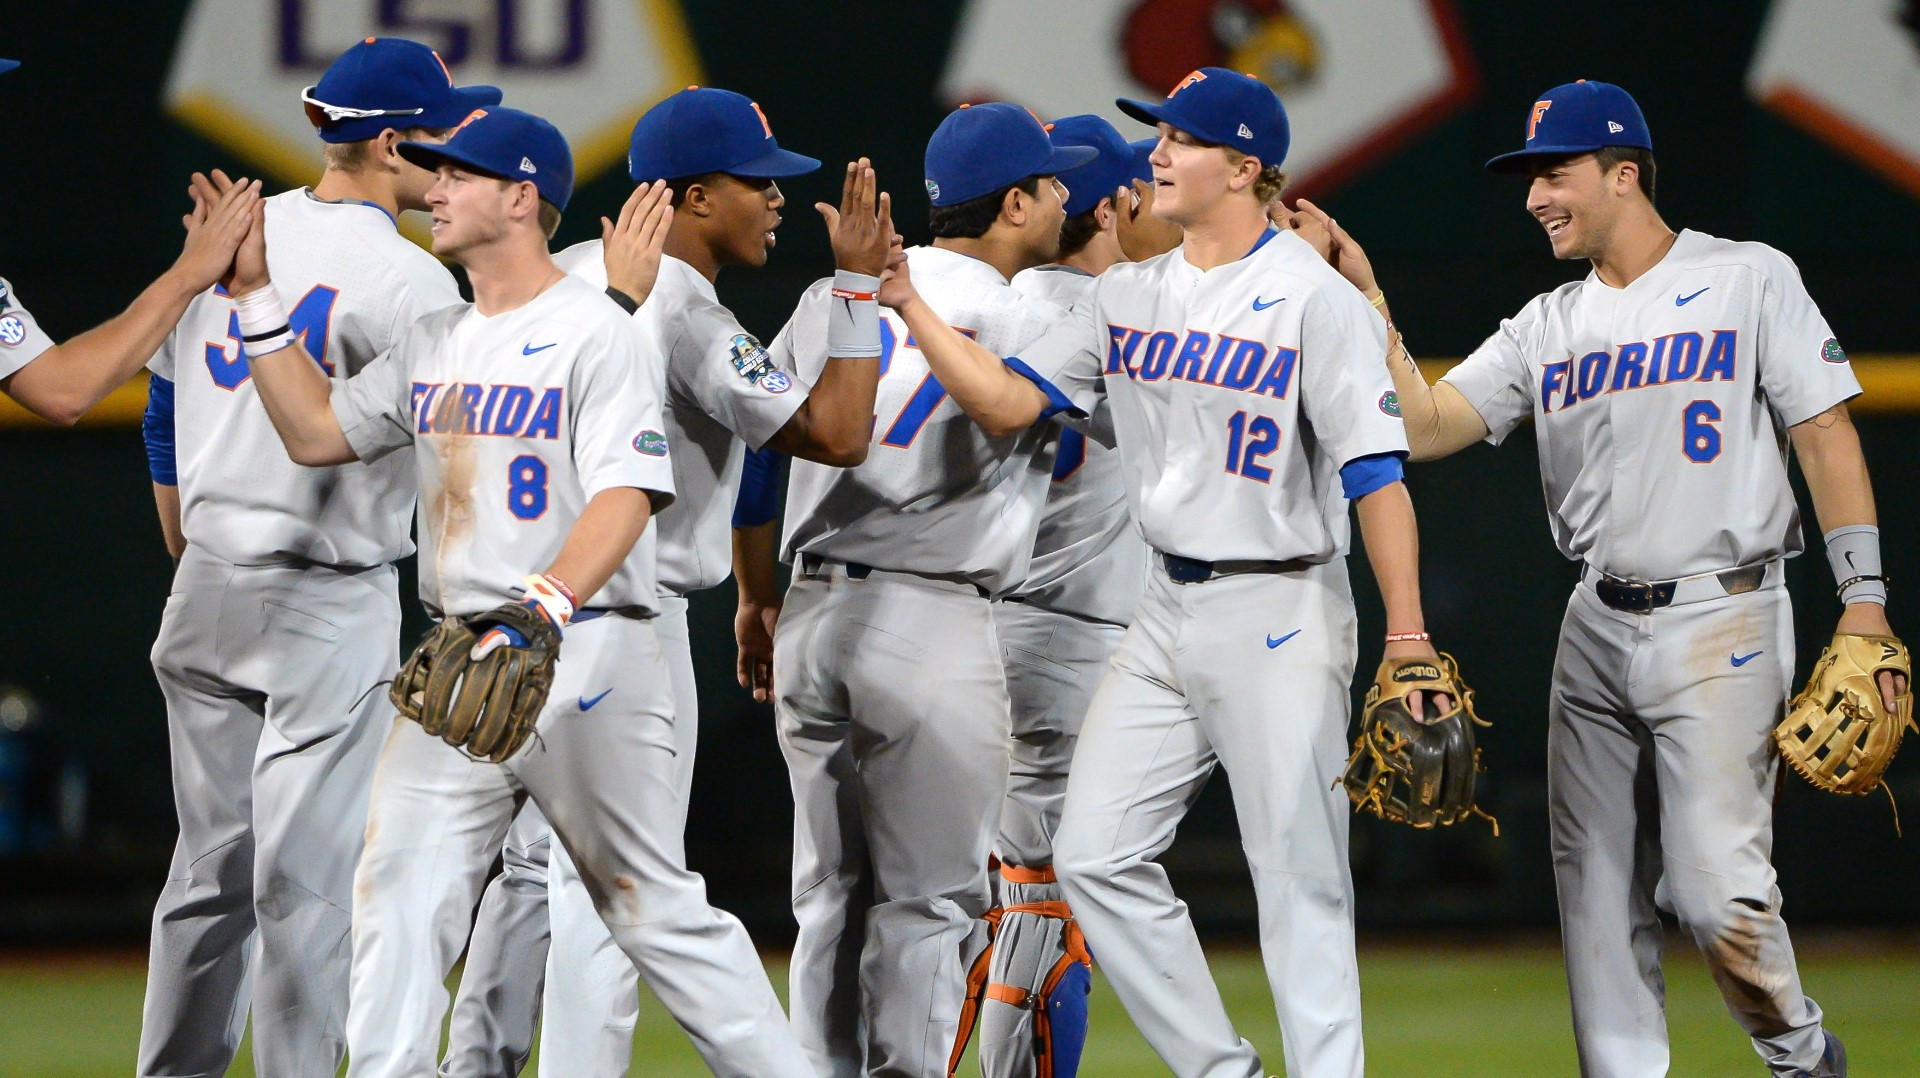 CWS FINALS Things to know as Florida, LSU play for title